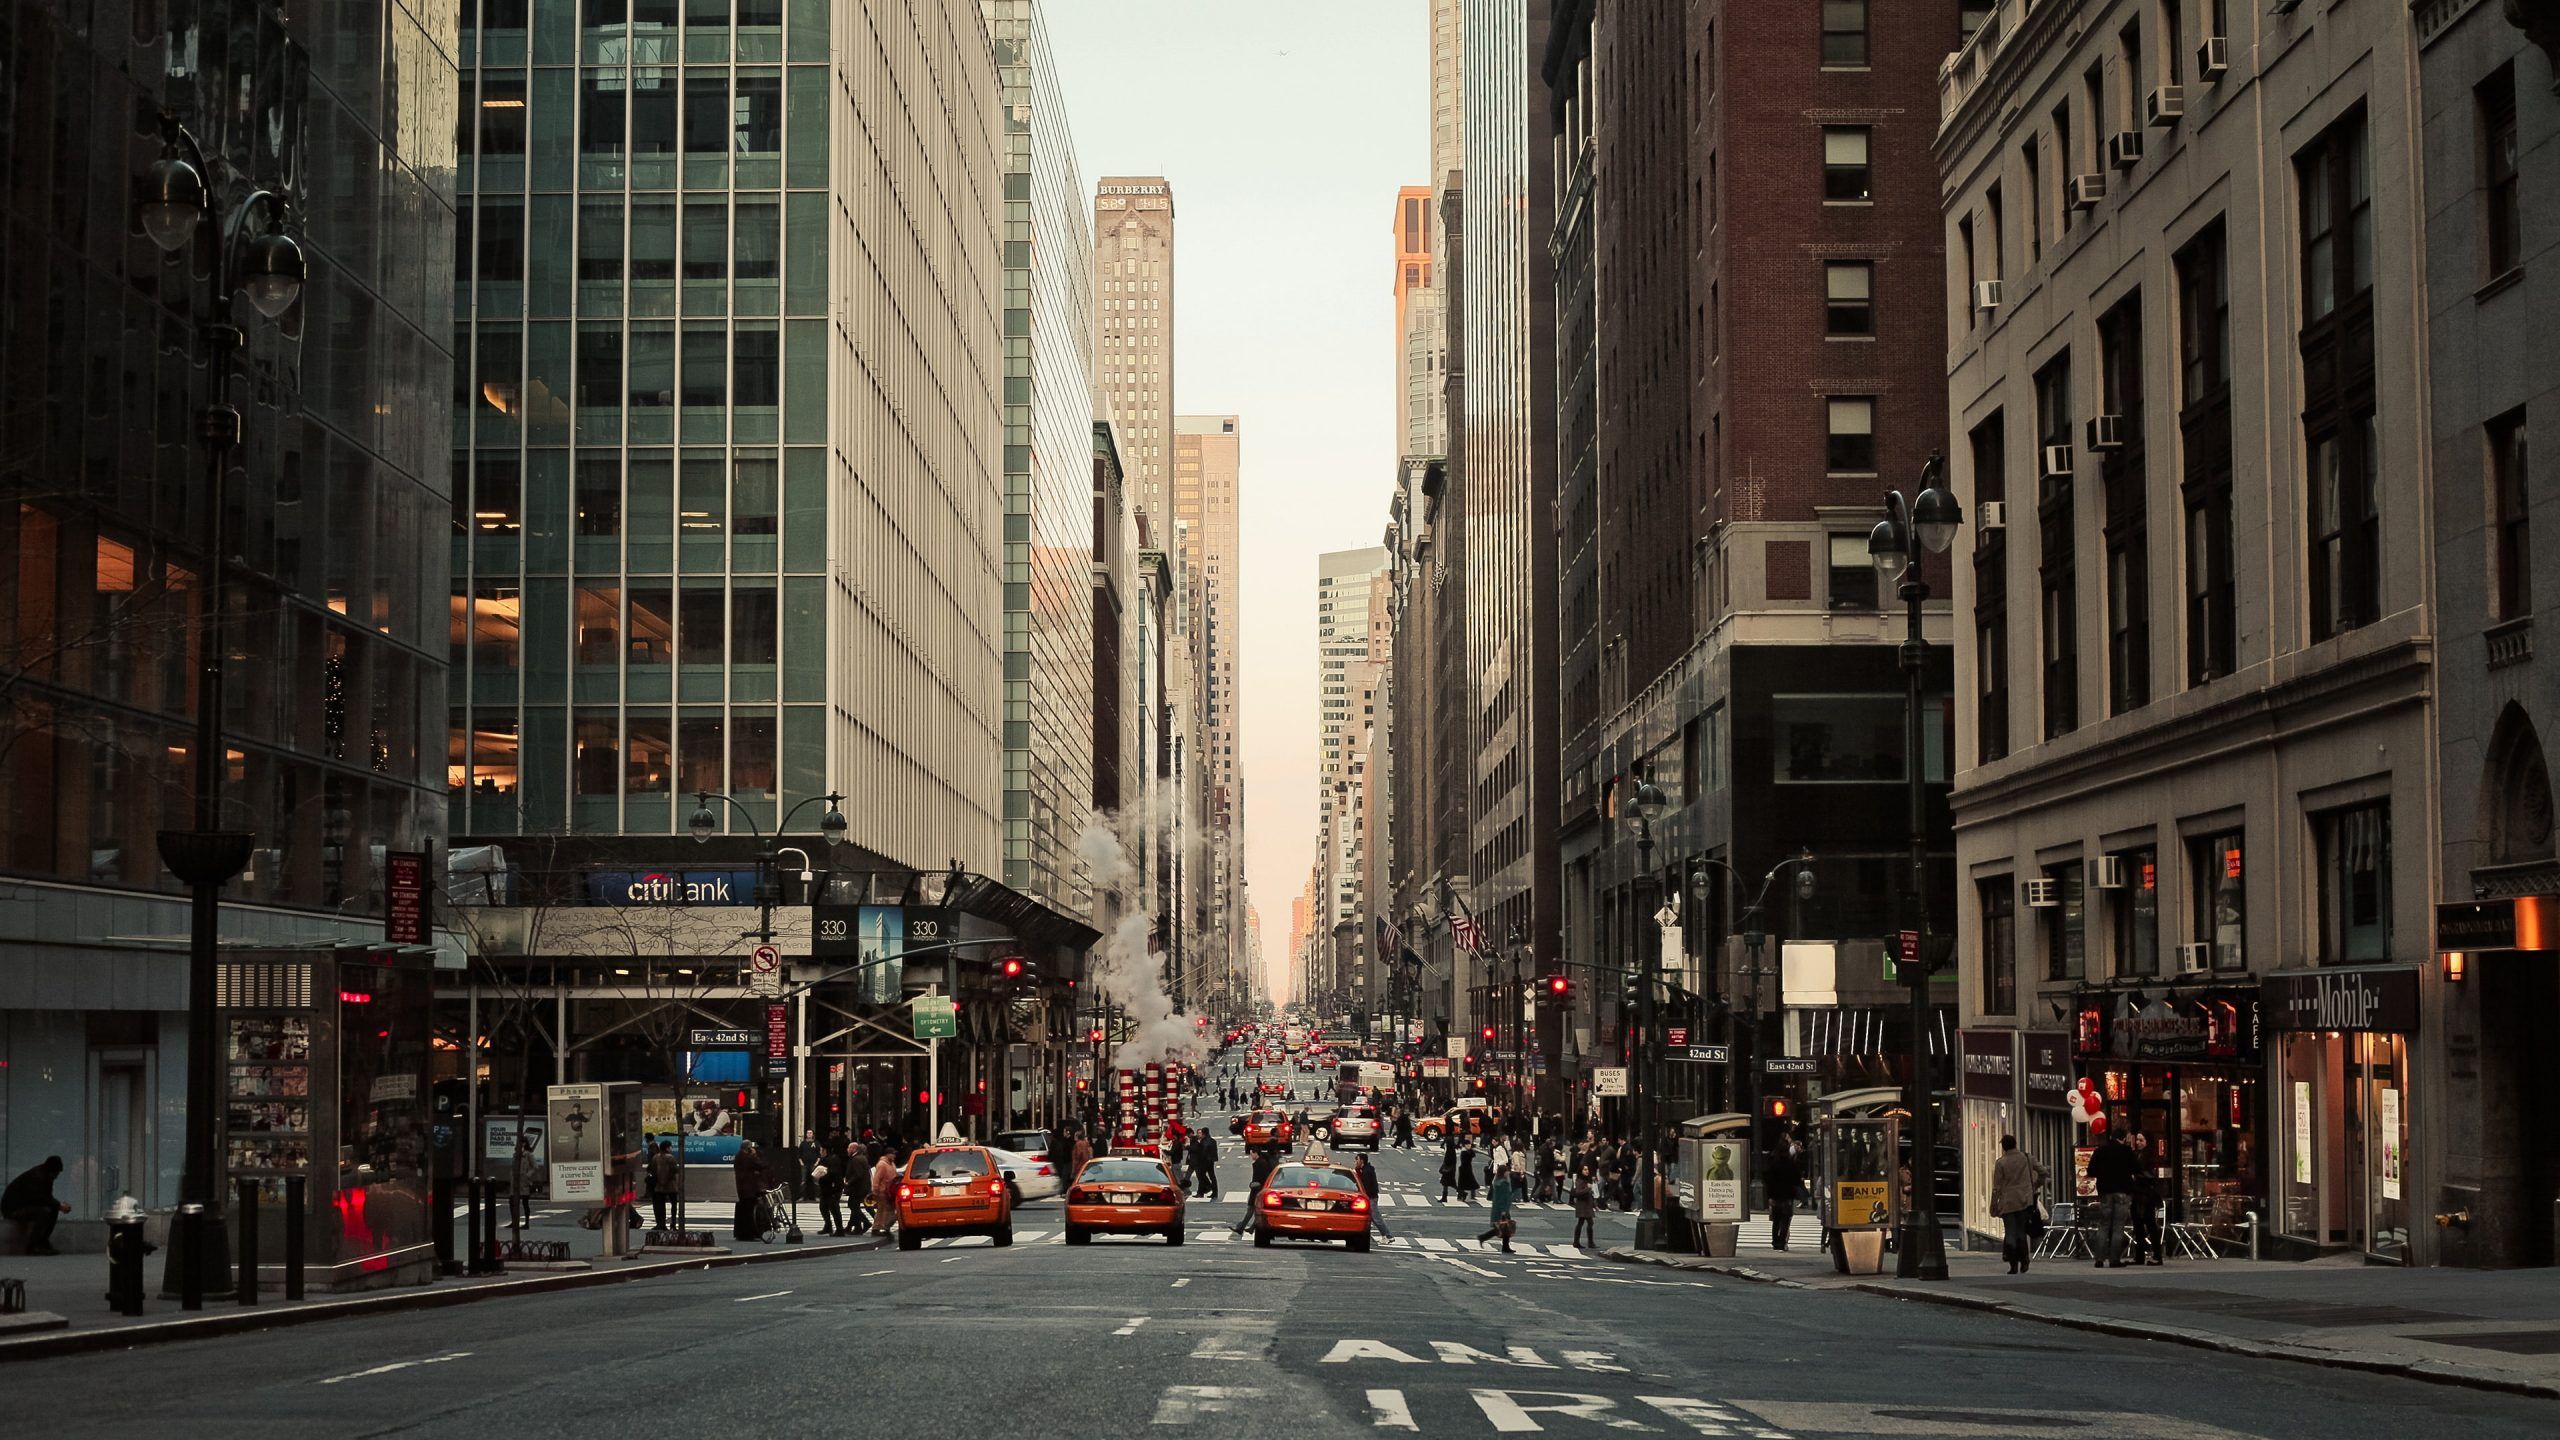 A city street with cars and people - New York